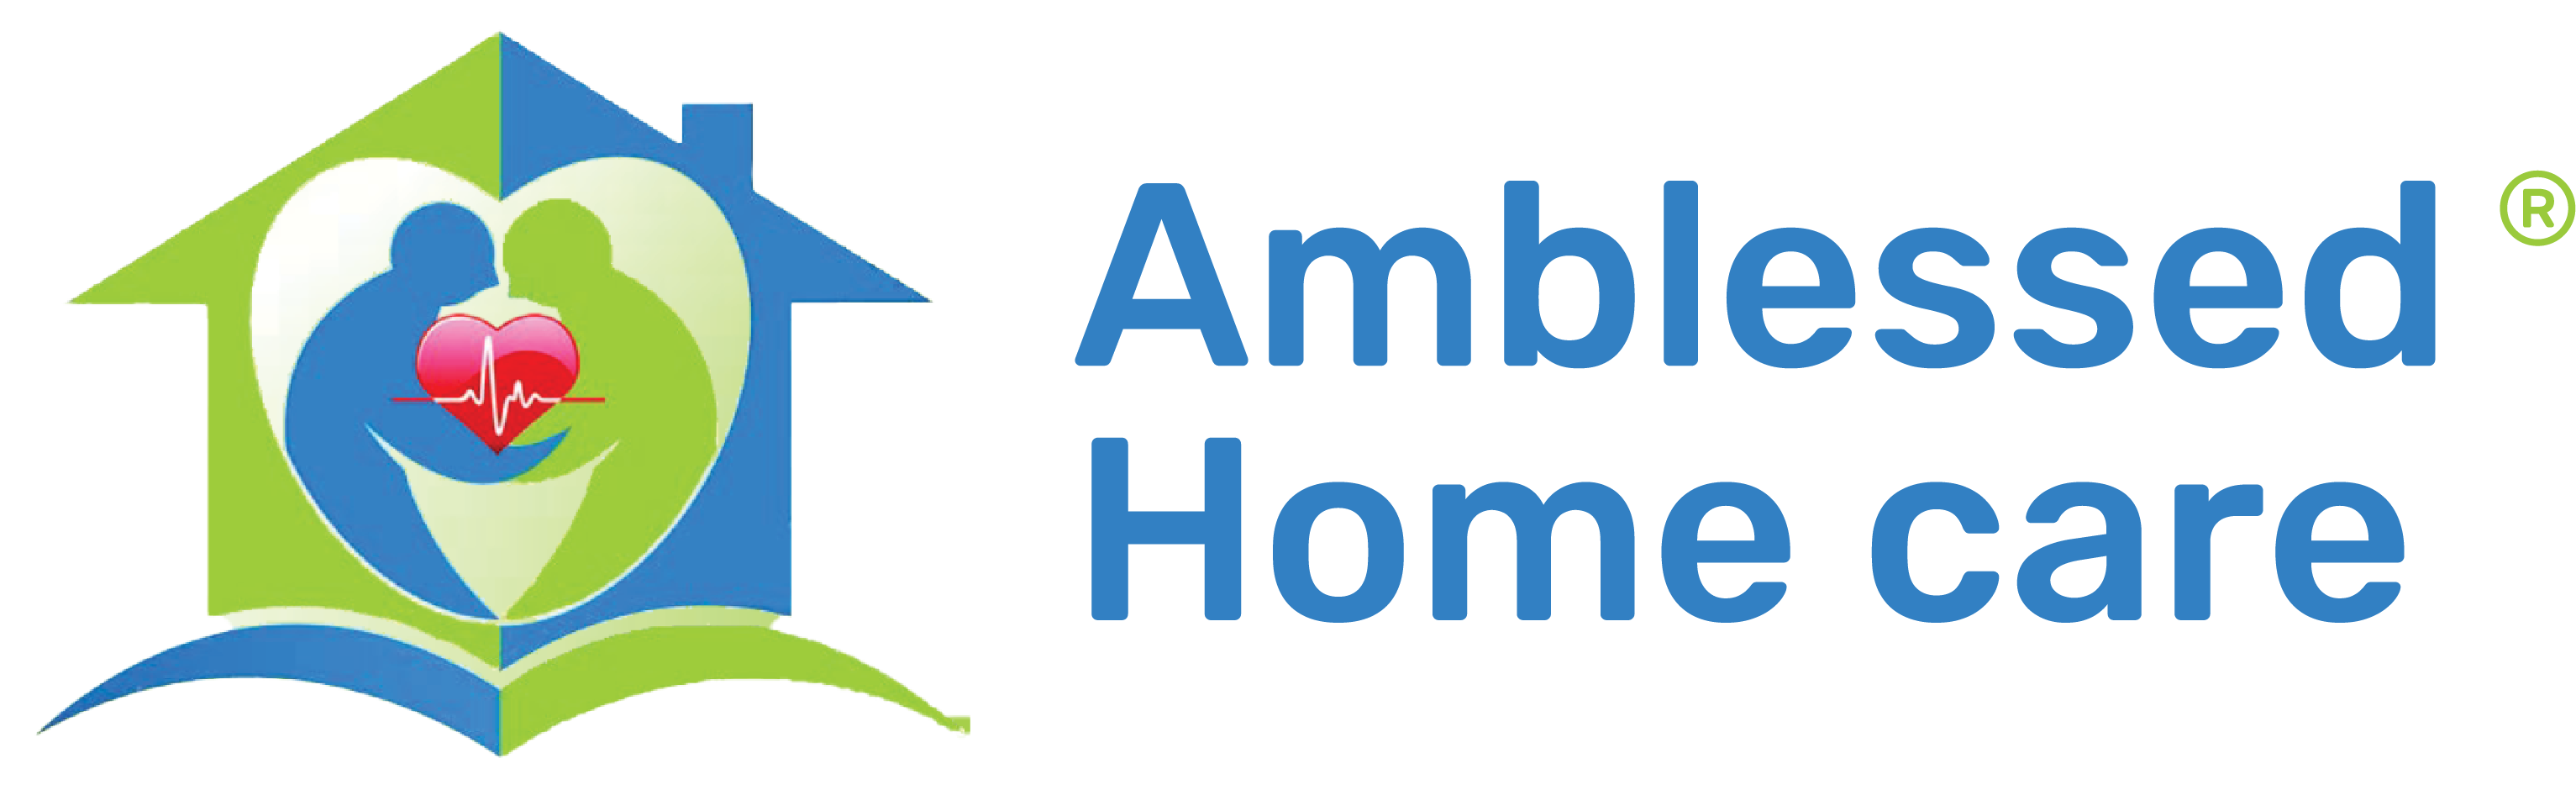 AmBlessed Home care